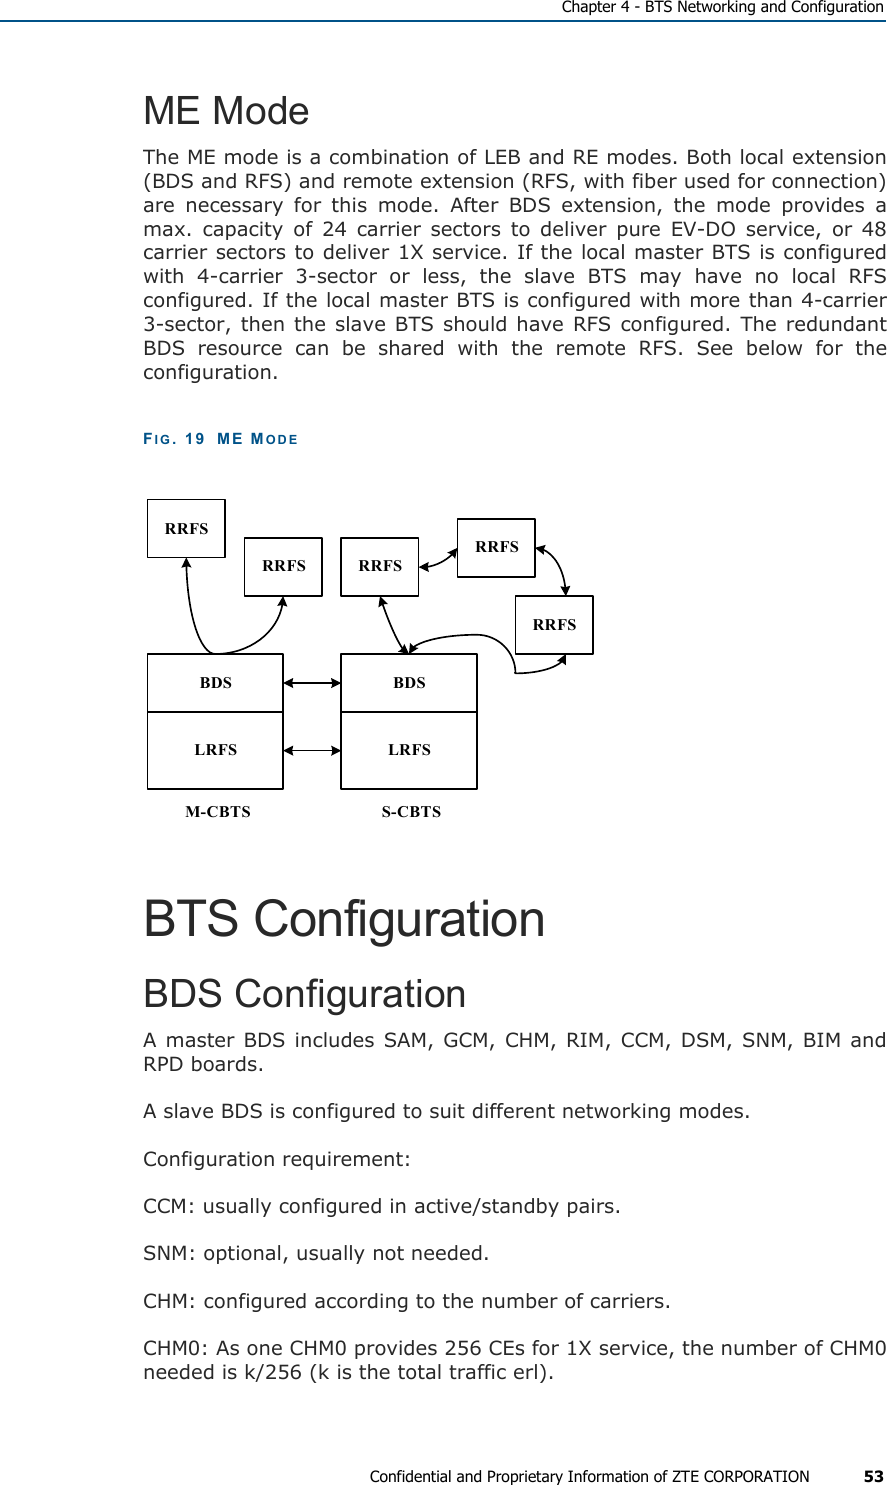   Chapter 4 - BTS Networking and Configuration Confidential and Proprietary Information of ZTE CORPORATION 53 ME Mode The ME mode is a combination of LEB and RE modes. Both local extension (BDS and RFS) and remote extension (RFS, with fiber used for connection) are necessary for this mode. After BDS extension, the mode provides a max. capacity of 24 carrier sectors to deliver pure EV-DO service, or 48 carrier sectors to deliver 1X service. If the local master BTS is configured with 4-carrier 3-sector or less, the slave BTS may have no local RFS configured. If the local master BTS is configured with more than 4-carrier 3-sector, then the slave BTS should have RFS configured. The redundant BDS resource can be shared with the remote RFS. See below for the configuration.  FIG. 19  ME MODE BDSLRFSBDSLRFSRRFSRRFSRRFSRRFSRRFSM-CBTS S-CBTS BTS Configuration BDS Configuration A master BDS includes SAM, GCM, CHM, RIM, CCM, DSM, SNM, BIM and RPD boards. A slave BDS is configured to suit different networking modes.  Configuration requirement:  CCM: usually configured in active/standby pairs.  SNM: optional, usually not needed.  CHM: configured according to the number of carriers.  CHM0: As one CHM0 provides 256 CEs for 1X service, the number of CHM0 needed is k/256 (k is the total traffic erl).  